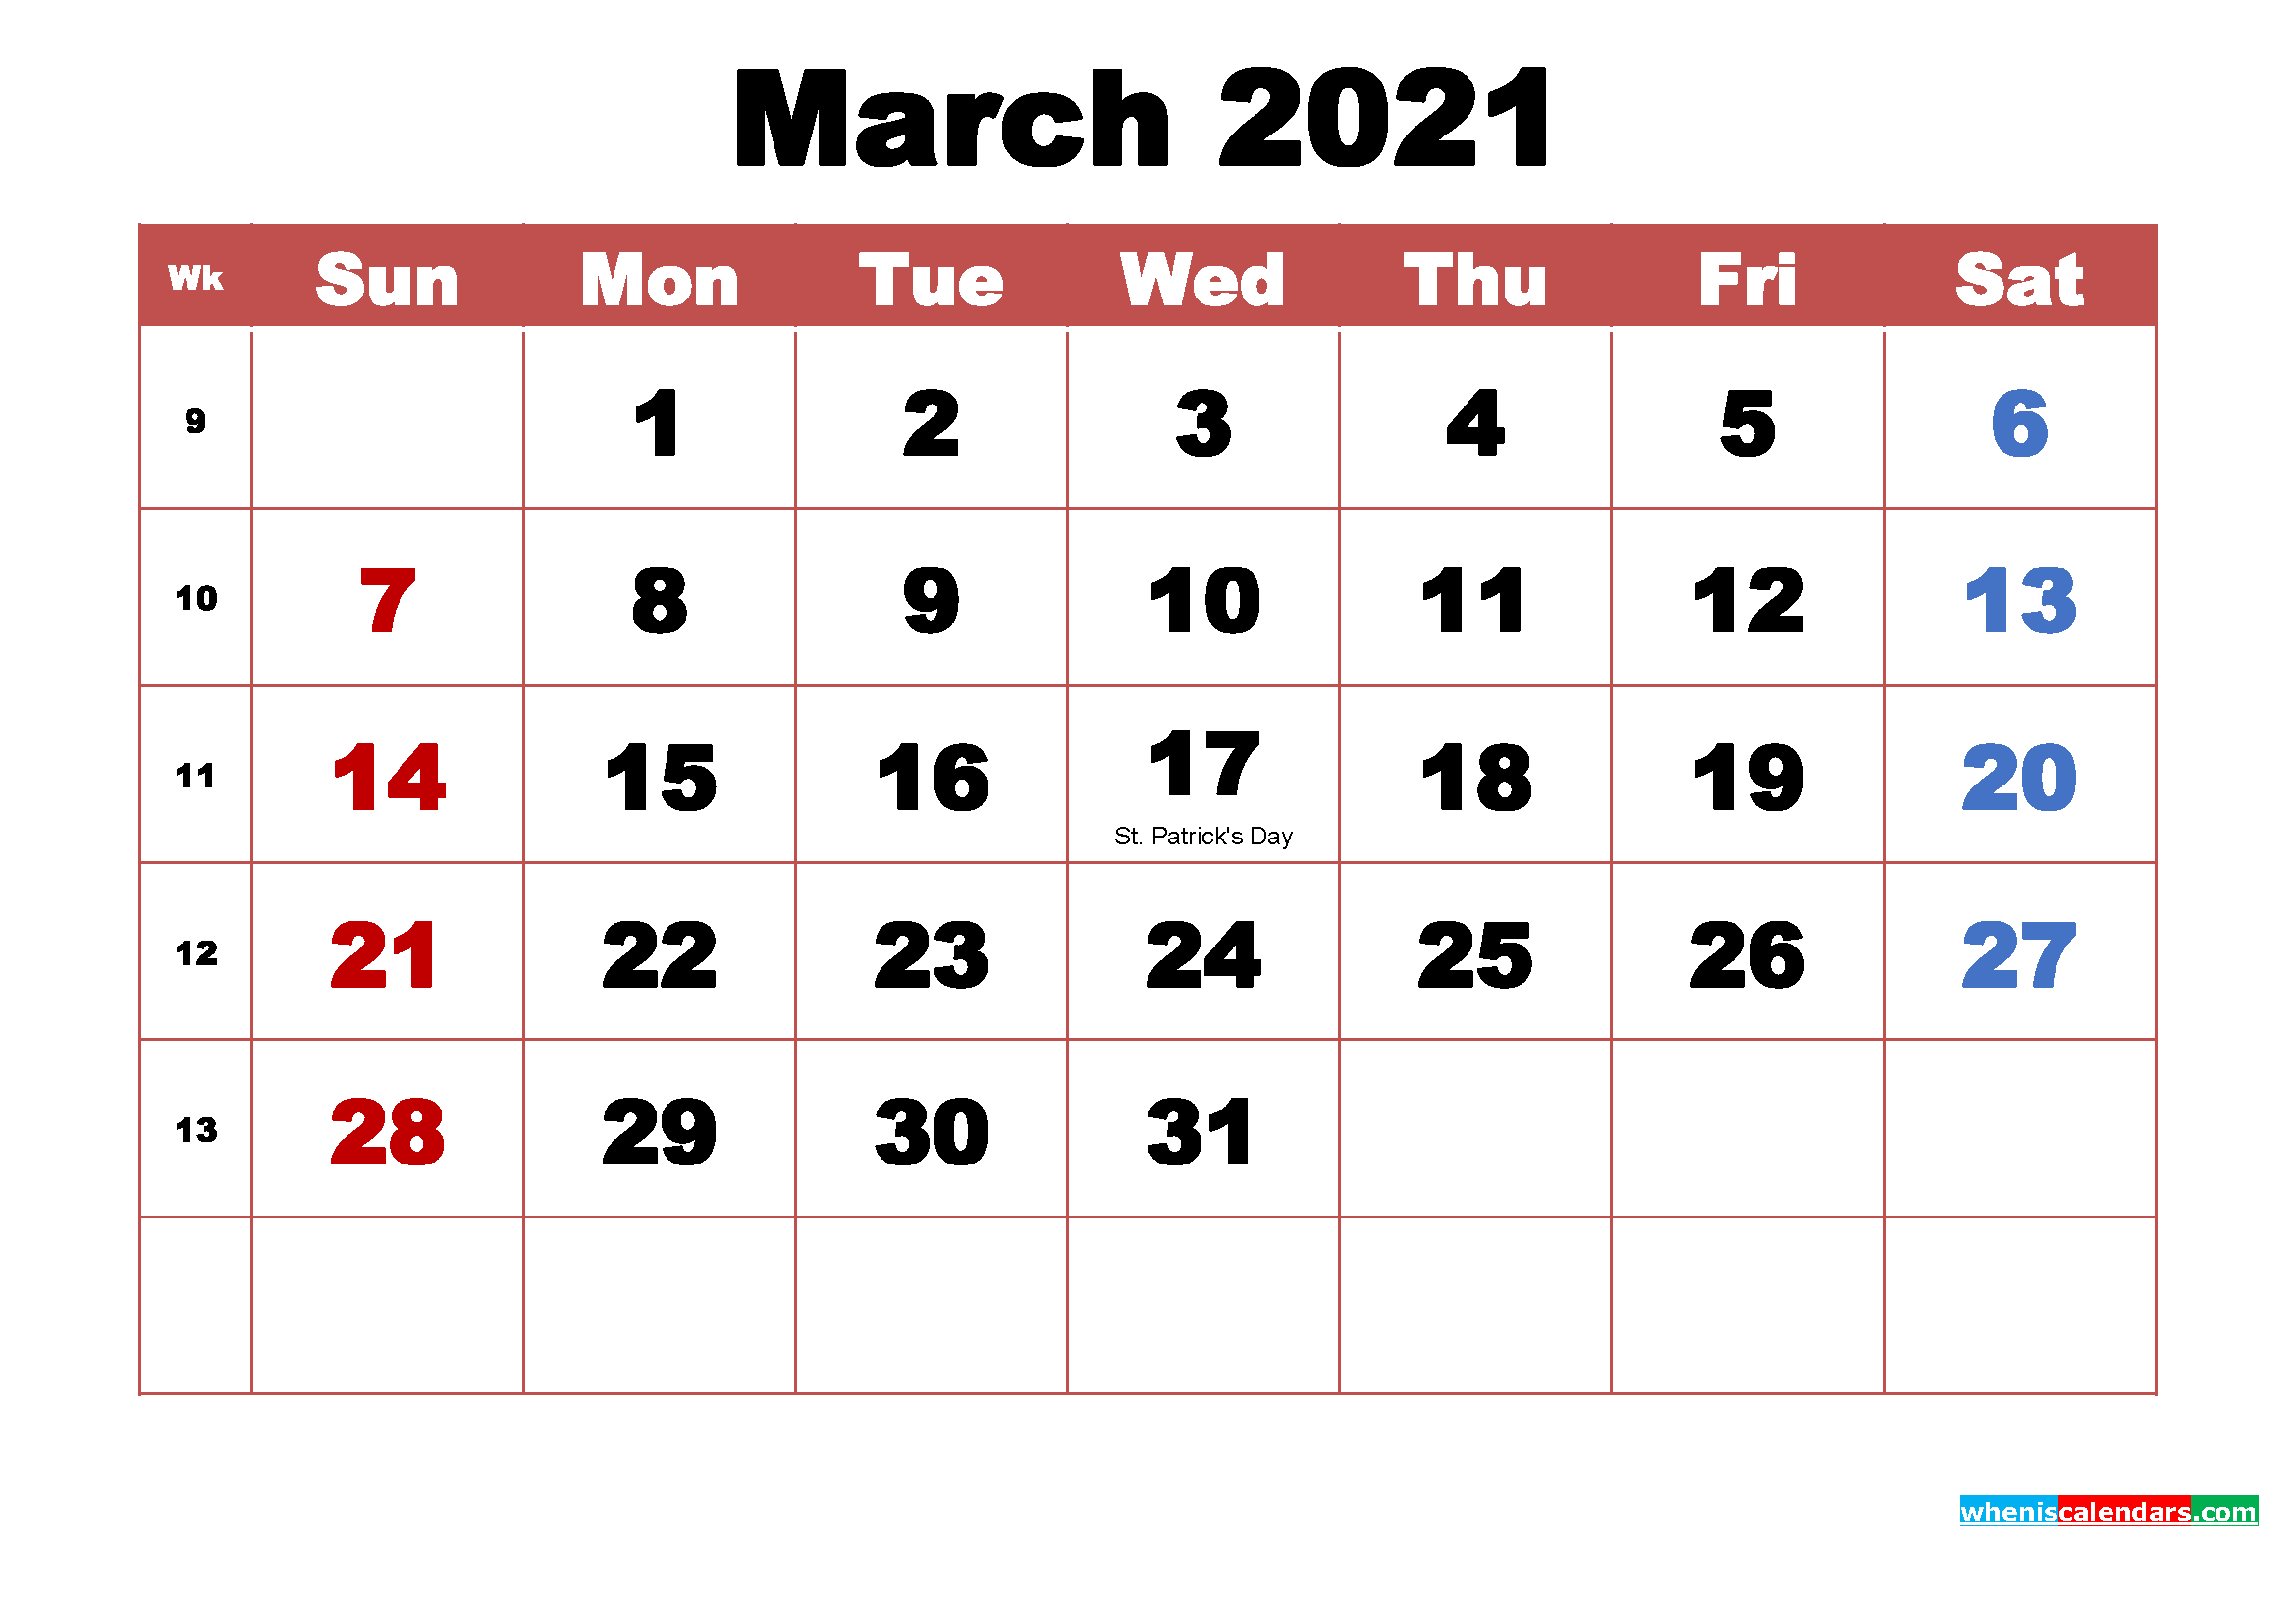 holiday calendar march 2021 Printable March 2021 Calendar With Holidays Word Pdf Free Printable 2020 Monthly Calendar With Holidays holiday calendar march 2021